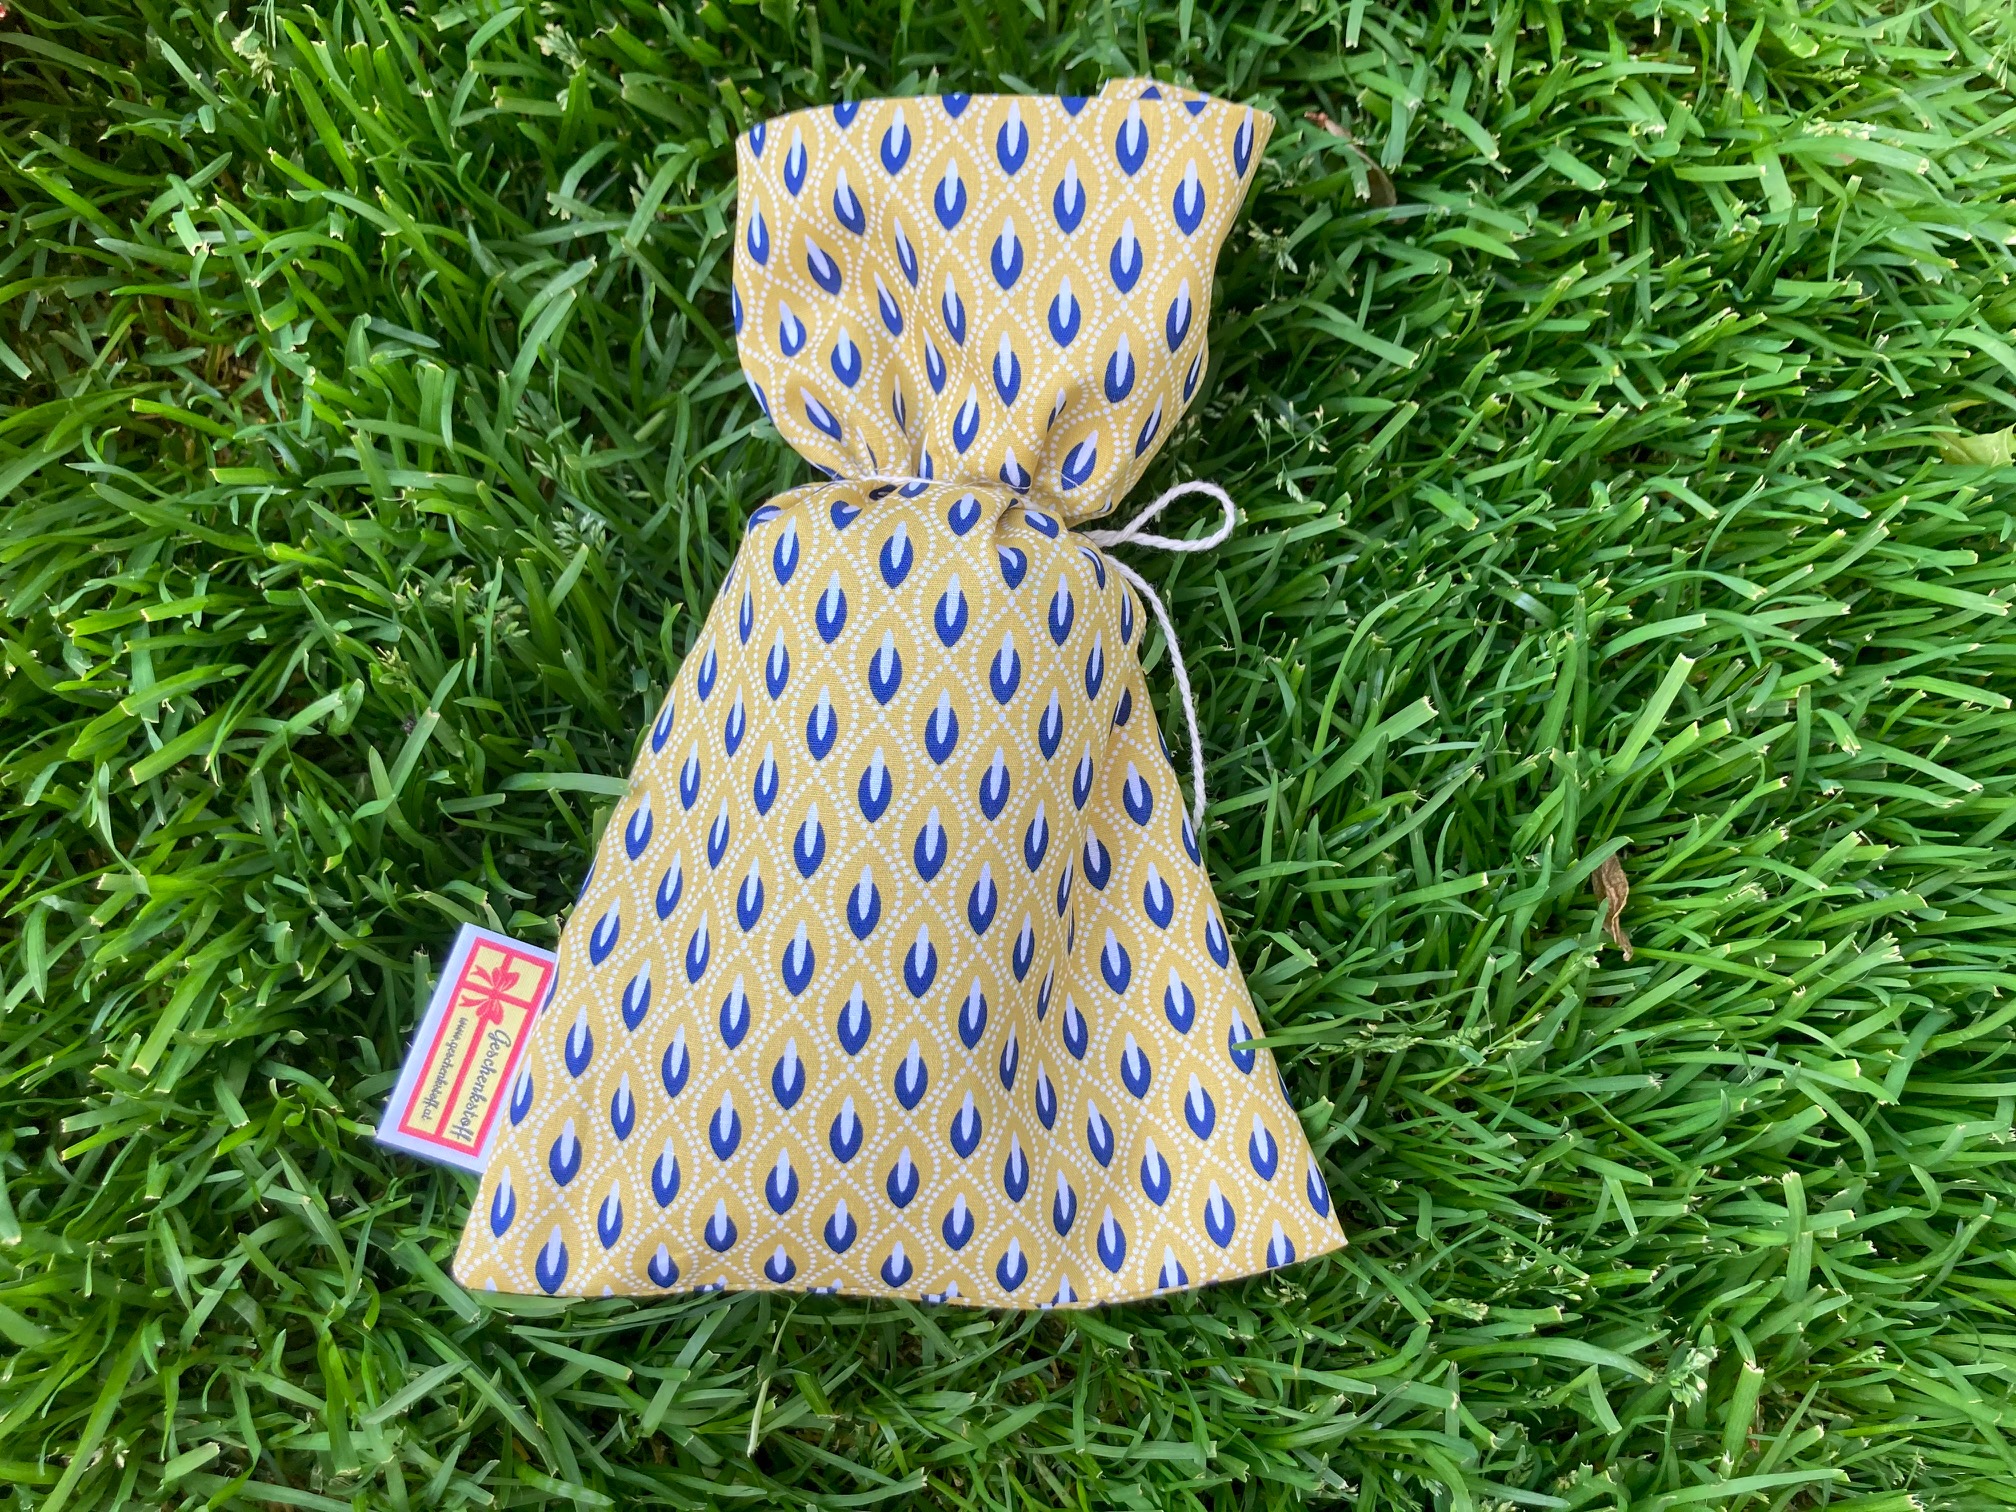 Everything Simple: Gold Drop Gift Cloth Sack